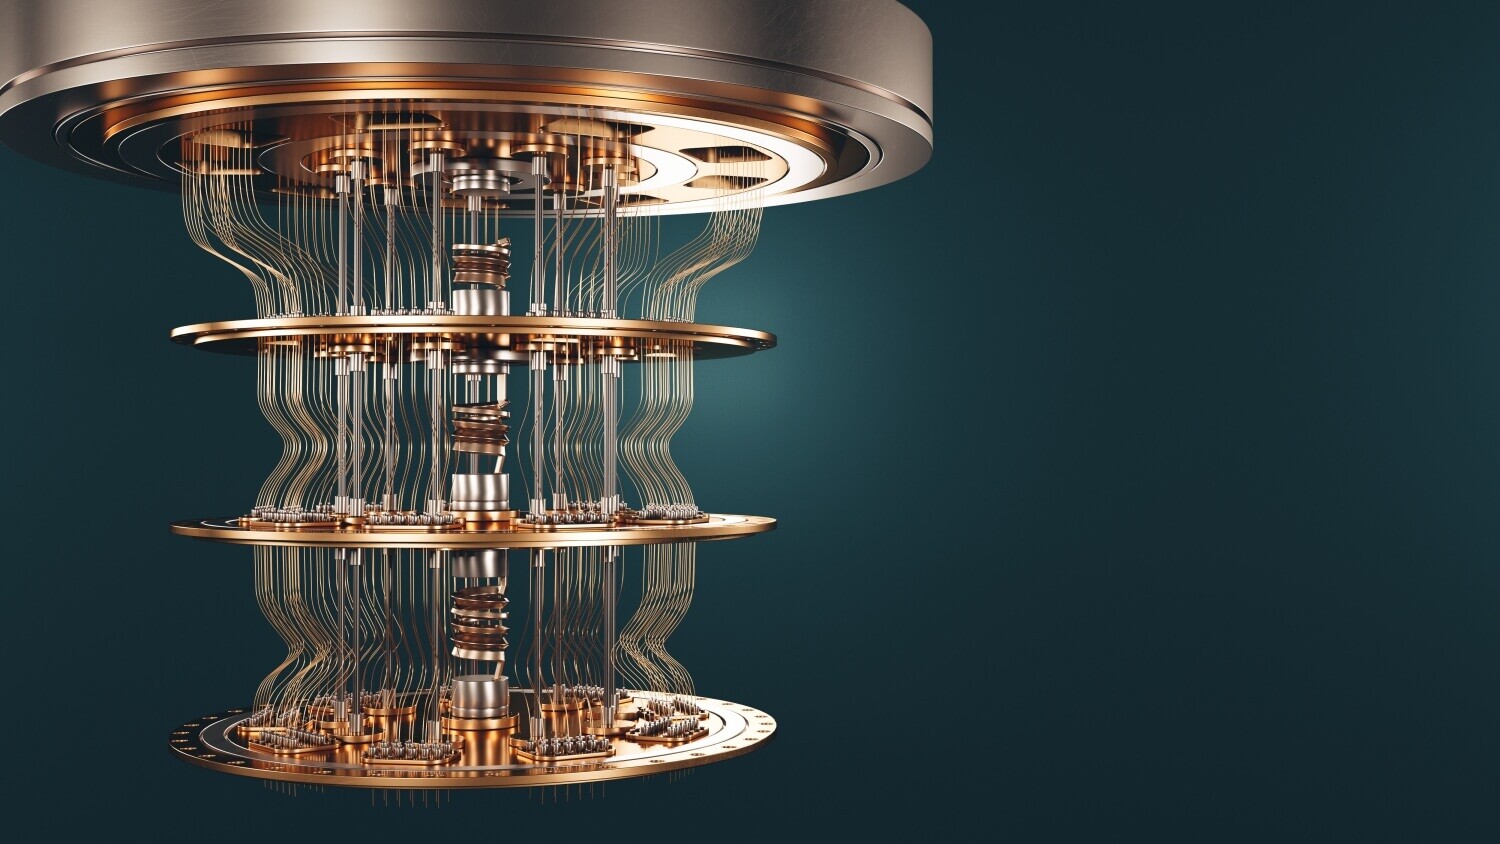 Honeywell Announces the World's Most Powerful Quantum Computer